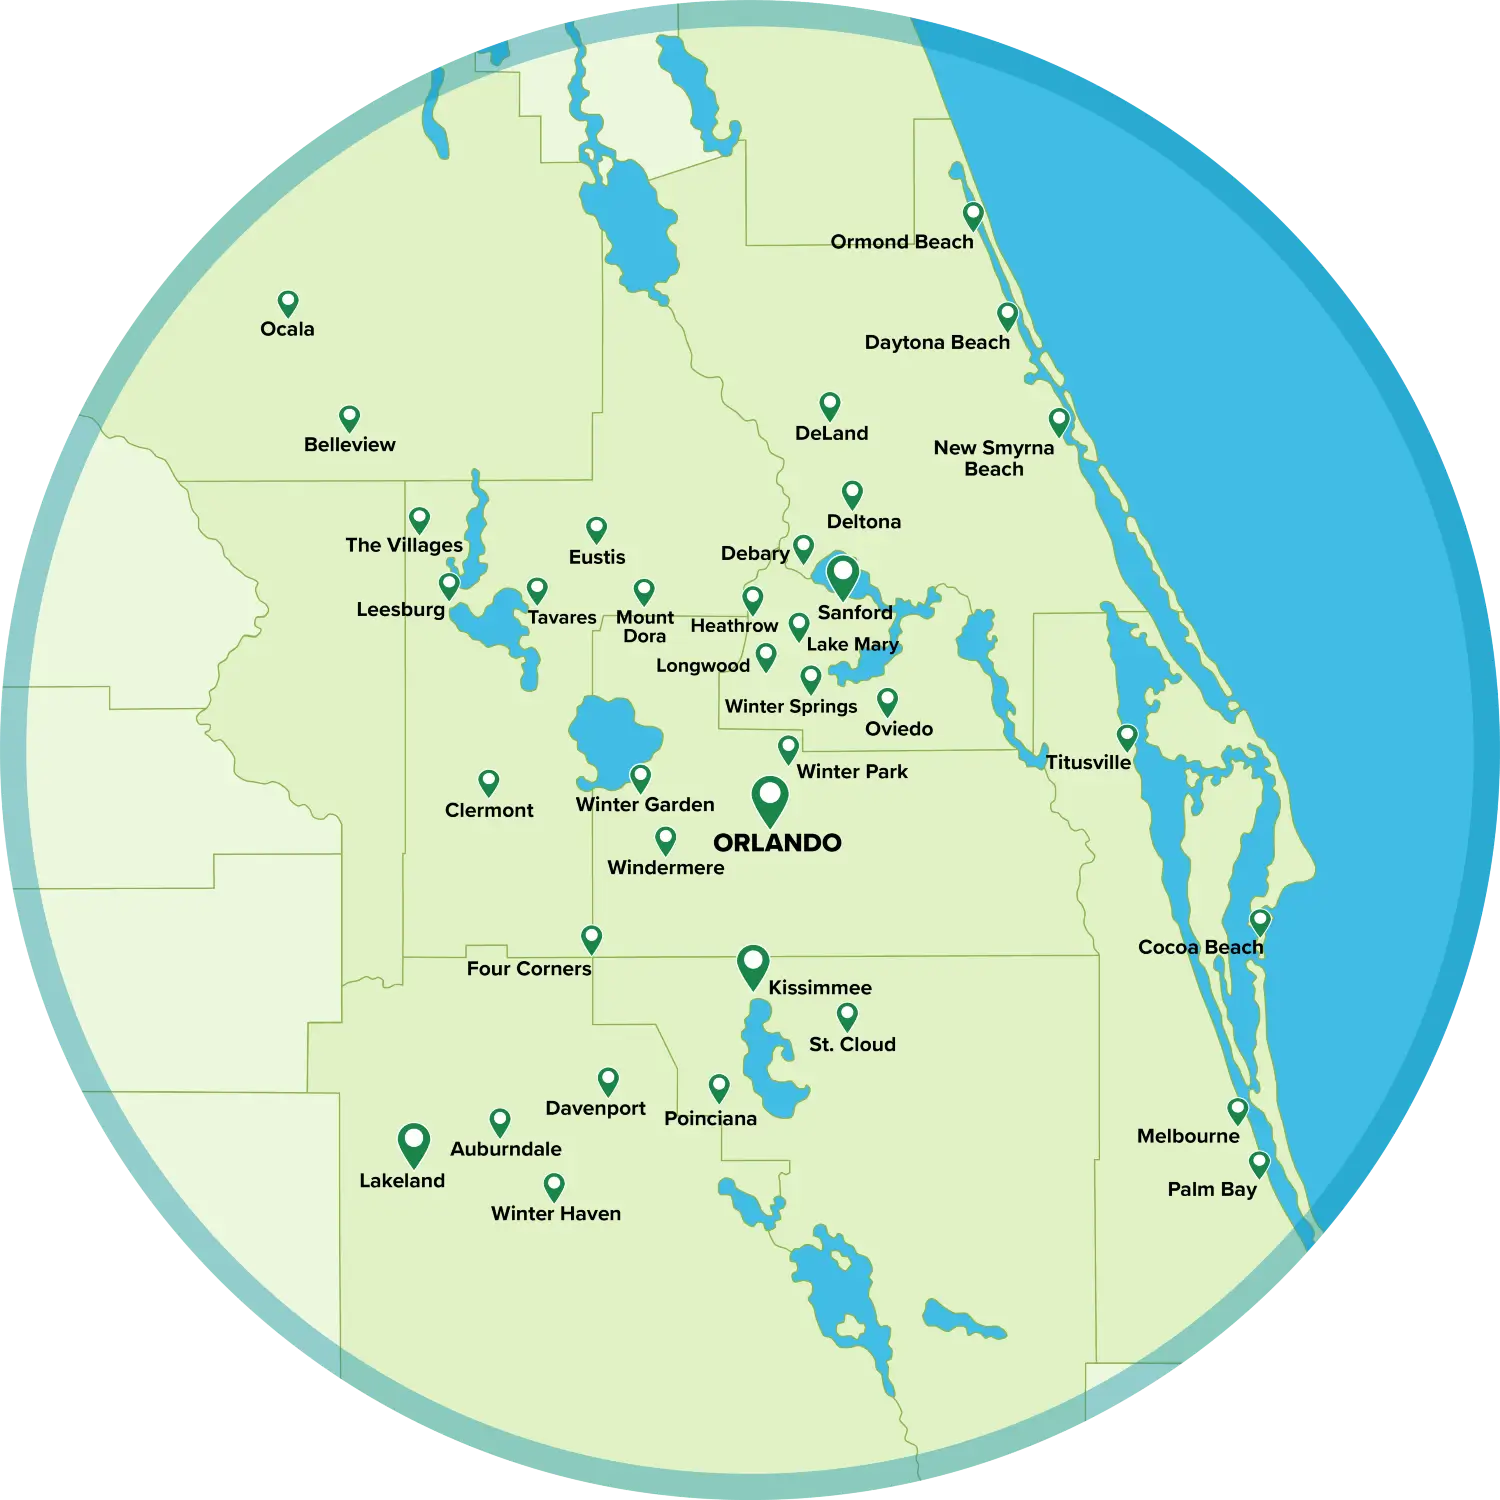 Sorko Services service area map - Local Pest Control and Pond Management in the Greater Orlando area - Sanford | Orlando | Winter Park | Oviedo | Heathrow | Kissimmee | Winter Springs | Clermont | Winter Garden | Windermere | Deltona | St Cloud | Four Corners | The Villages | Leesburg | Eustis | Titusville | Melbourne | Palm Bay | New Smyrna Beach | Poinciana | Deland | Debary | Tavares | Mount Dora | Lake Mary | Auburndale | Longwood | Belleview| Orange County | Seminole County | Lake County | Osceola County | Volusia County | Polk County | Marion County